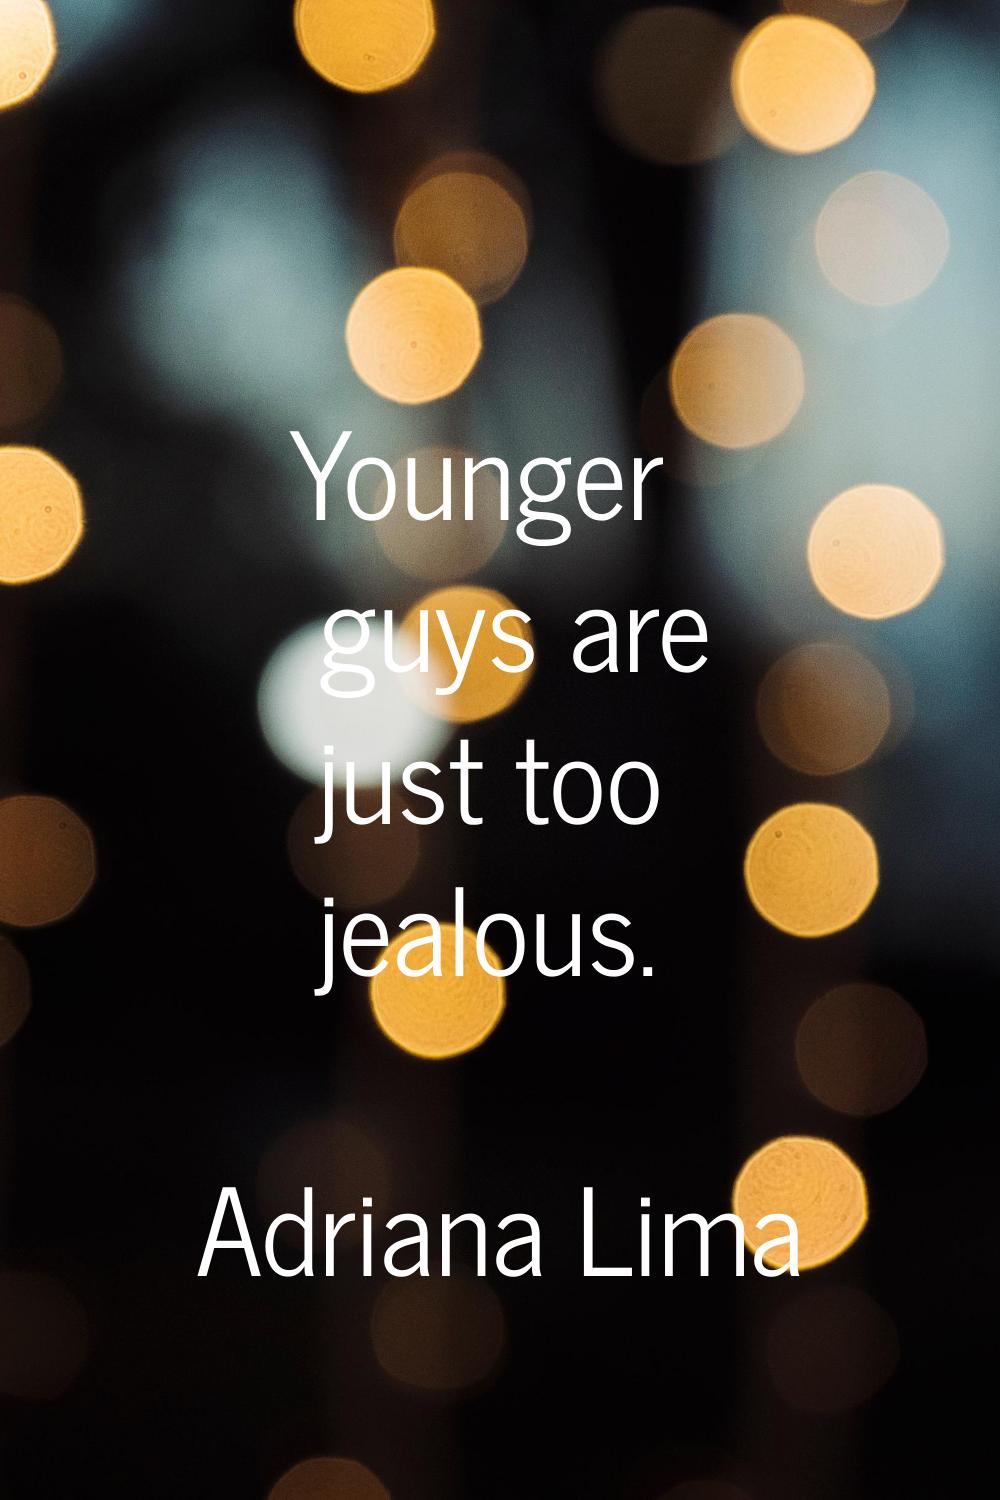 Younger guys are just too jealous.